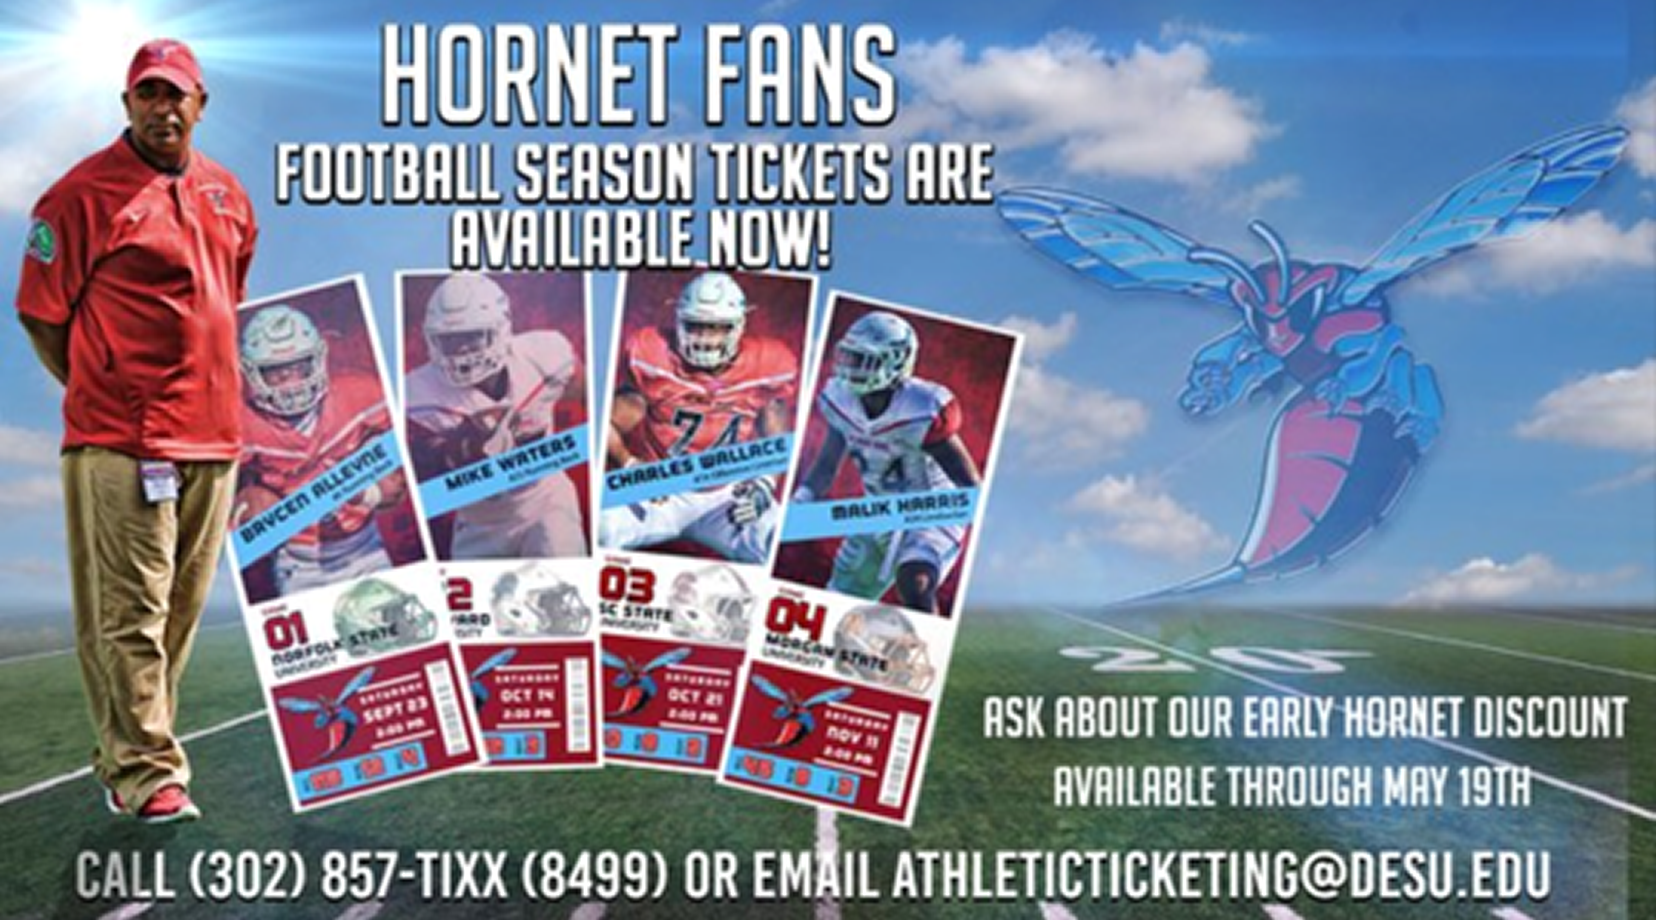 Time Running Out To Purchase Early Hornet Discount Football Season Tix